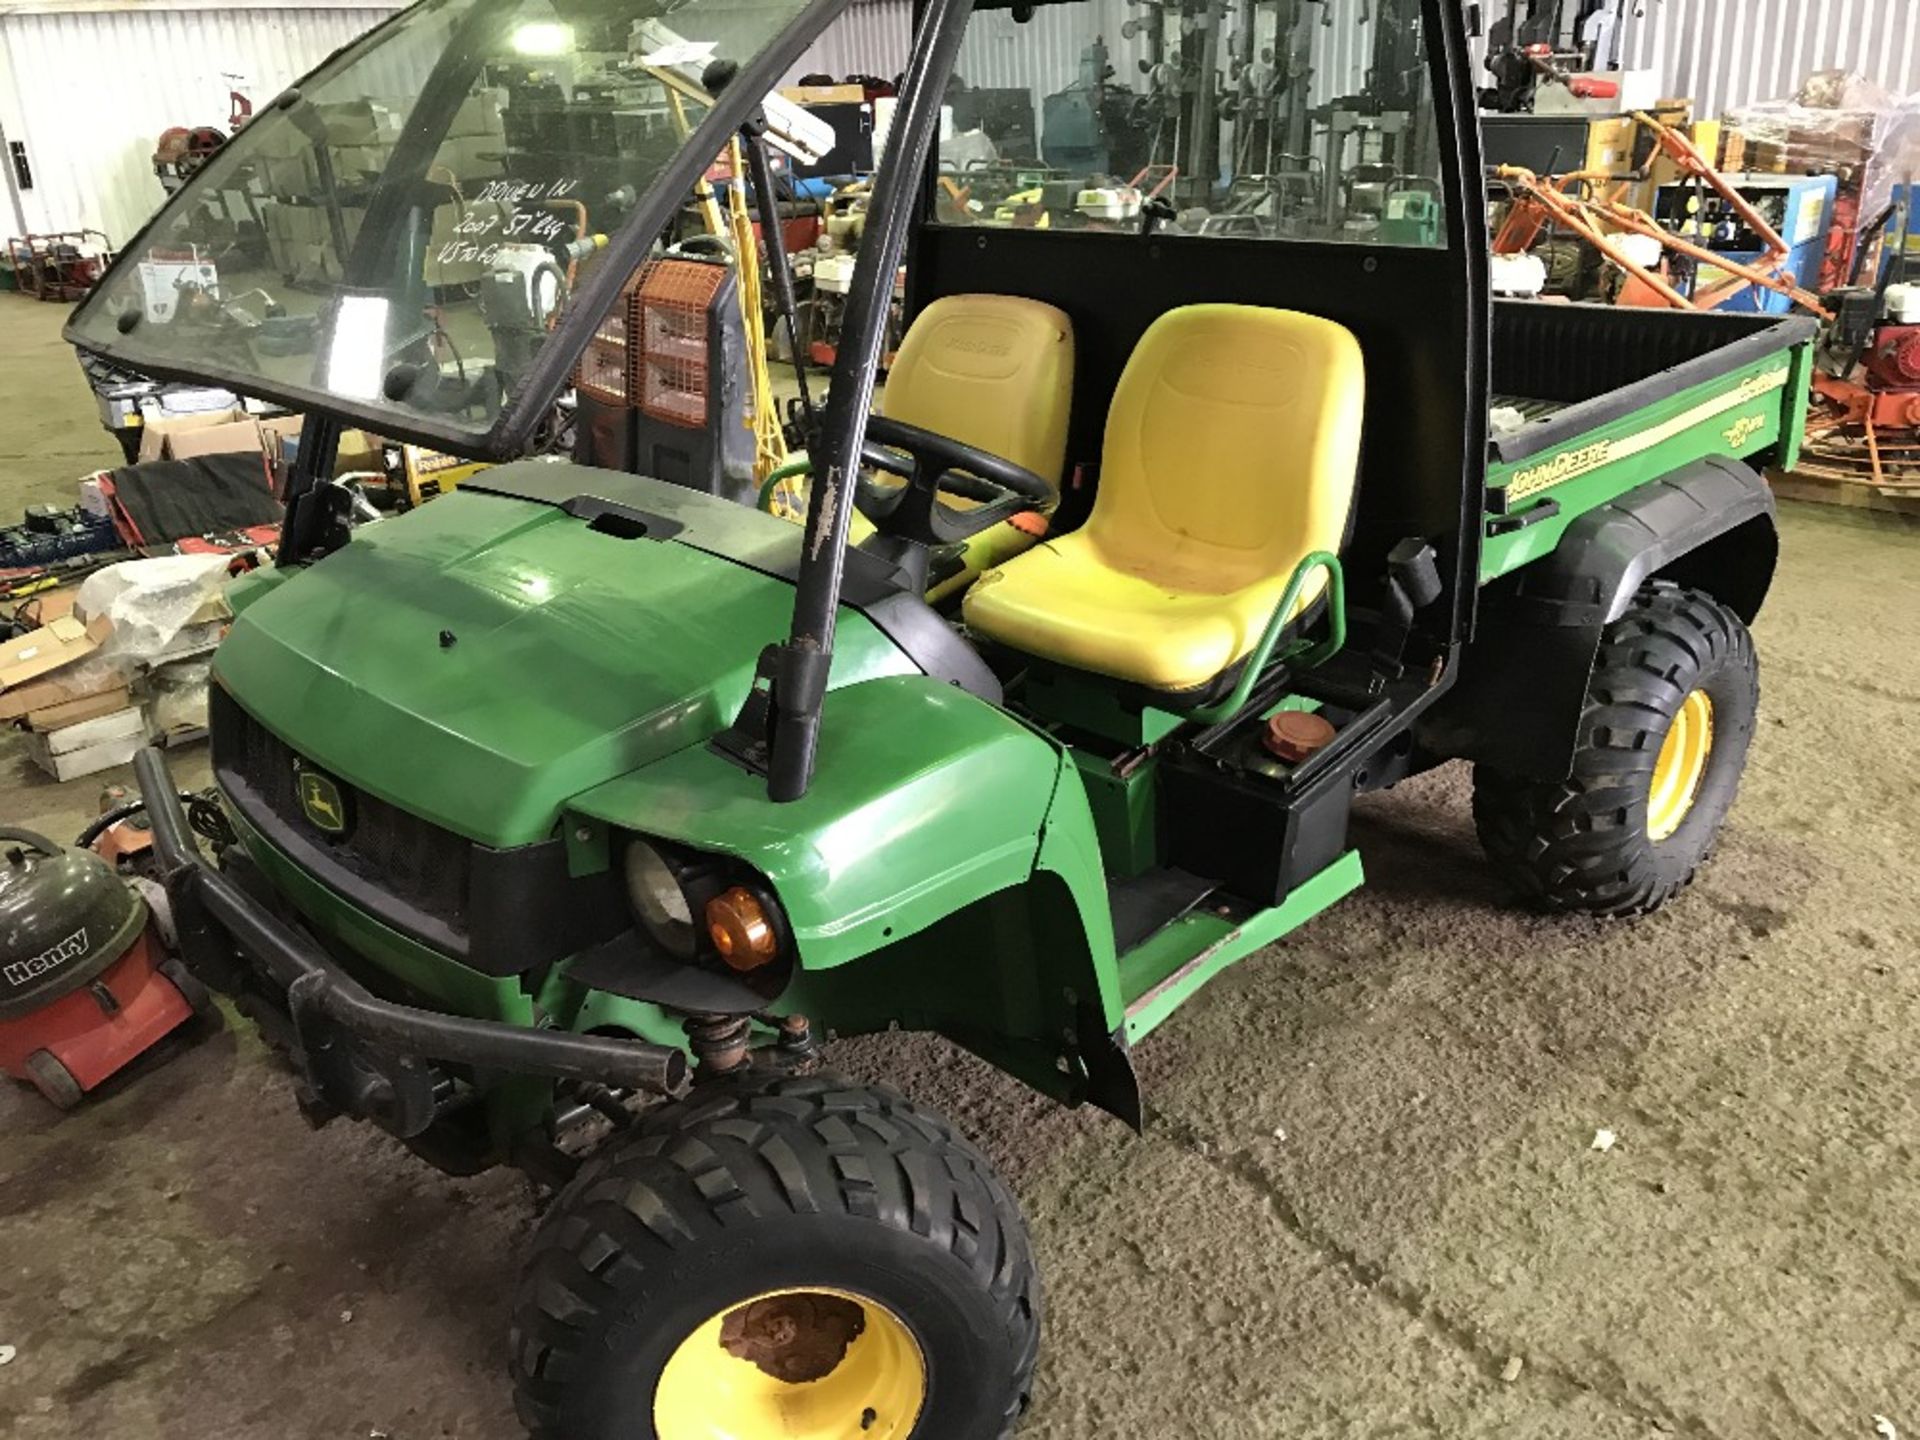 John Deere diesel Gator, yr2007 approx. WHEN TESTED WAS SEEN TO RUN AND DRIVE..SEE VIDEO